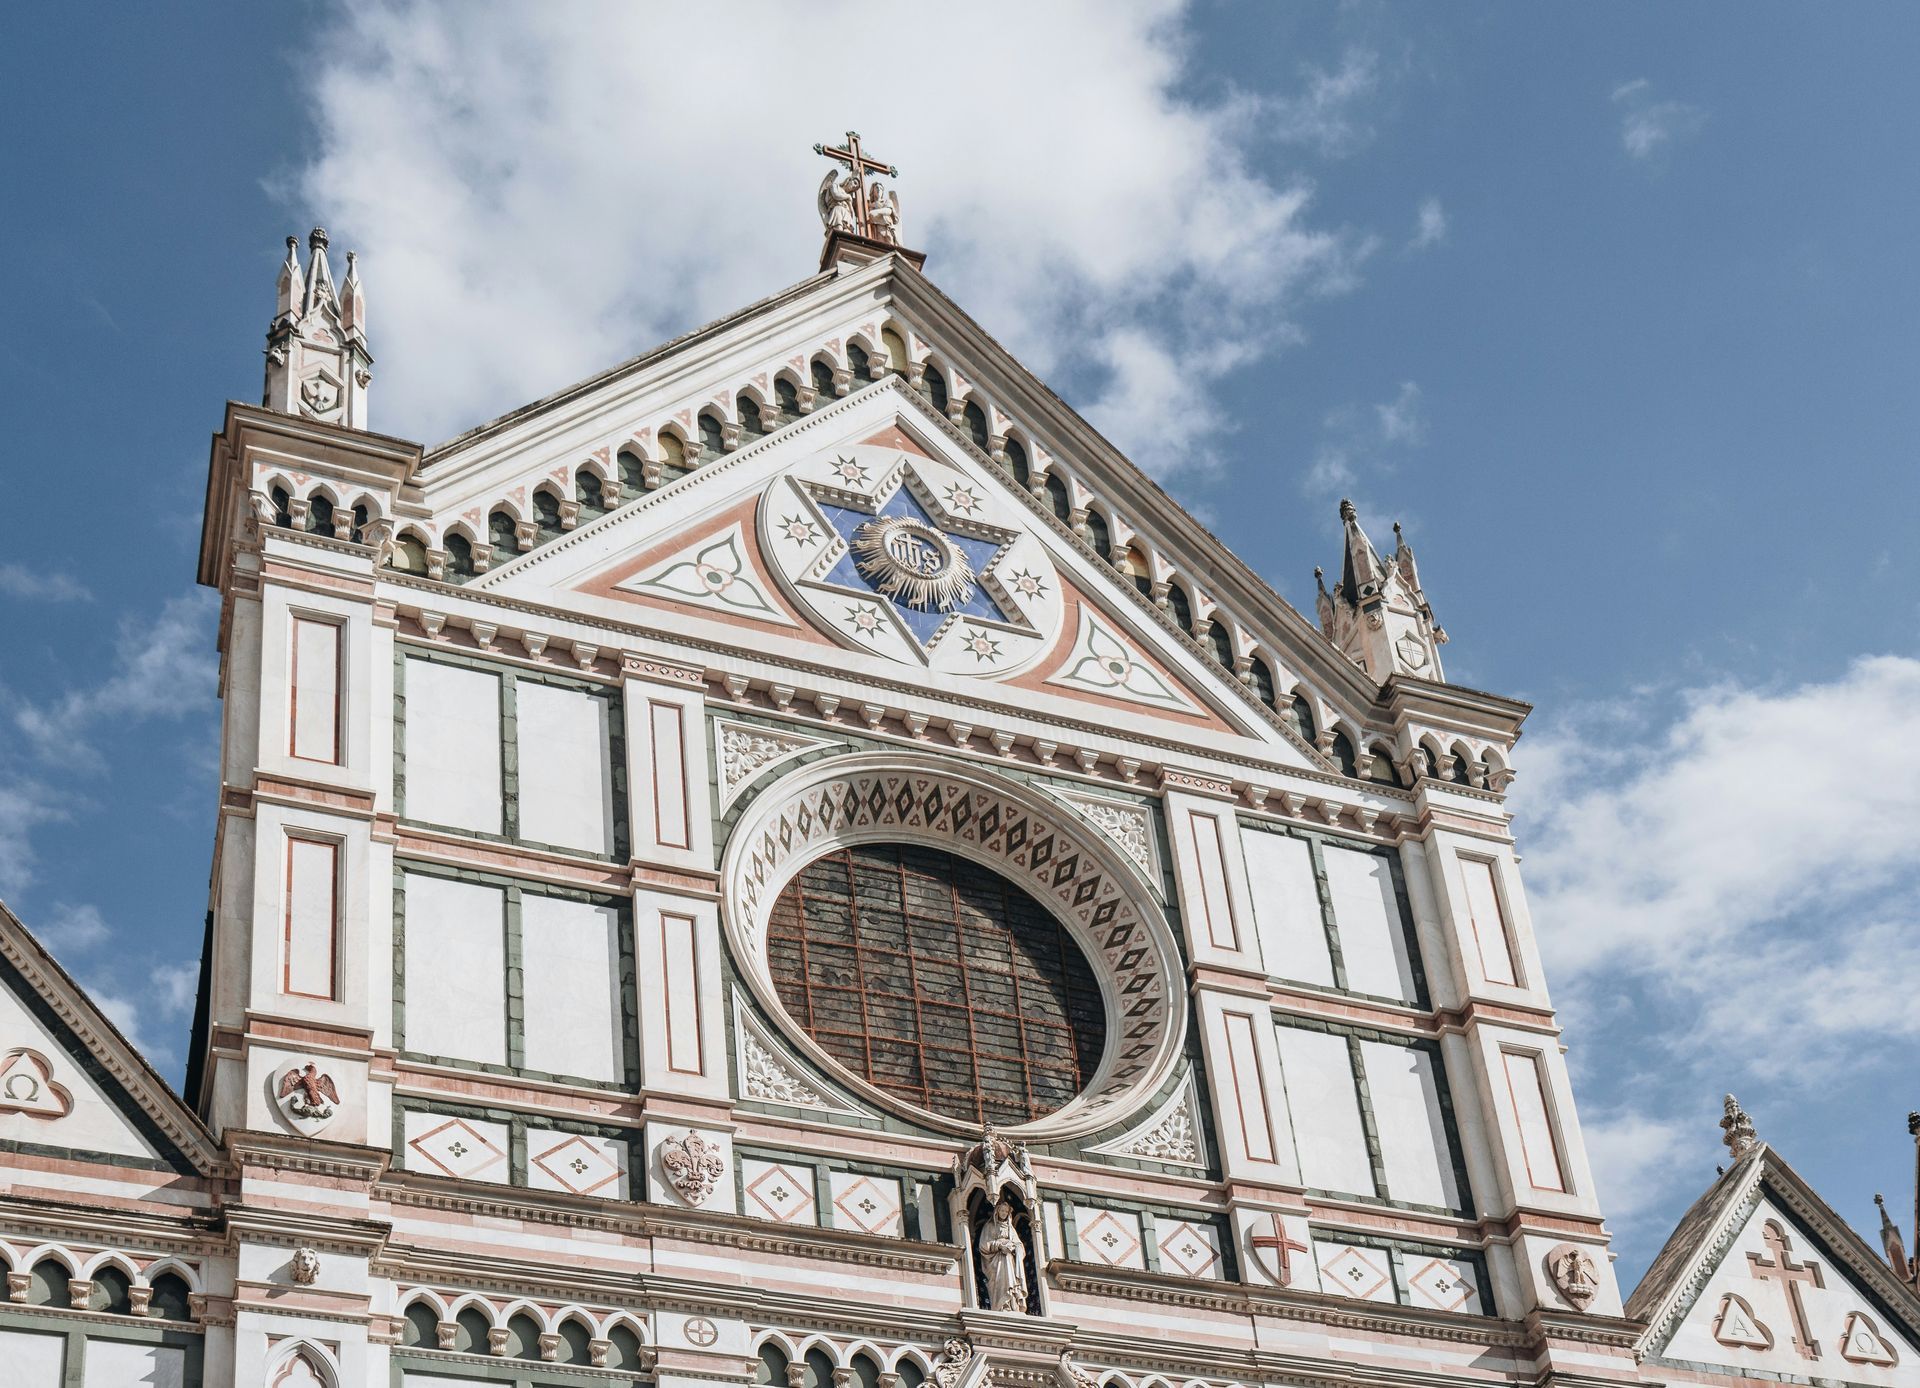 What to see inside the Basilica Santa Croce